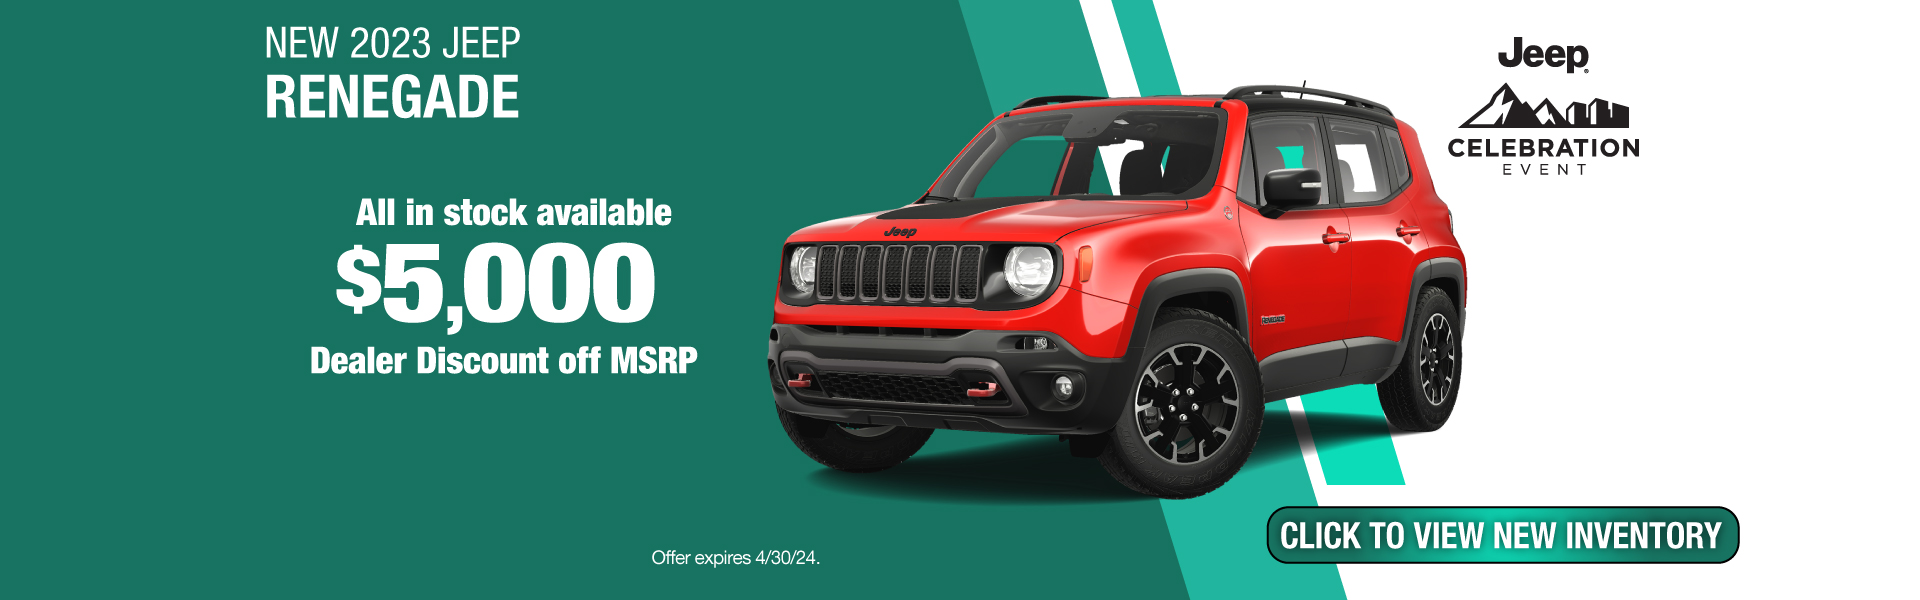 Get $5,000 Dealer Discount on a New 2023 Jeep Renegade! Expires 4/30/24.